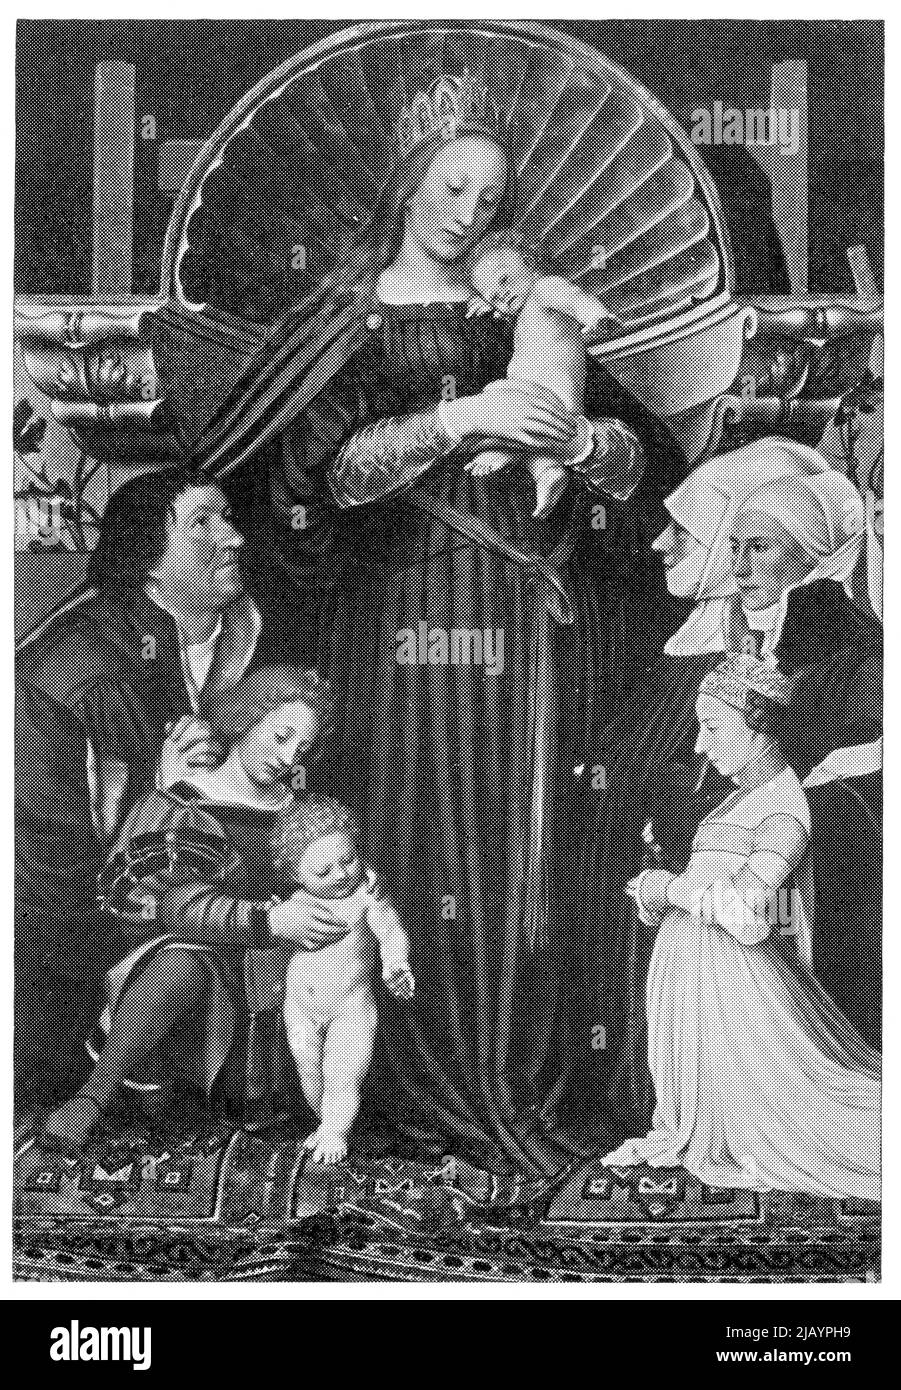 Darmstadt Madonna by a German-Swiss painter Hans Holbein the Younger. Publication of the book 'Meyers Konversations-Lexikon', Volume 2, Leipzig, Germany, 1910 Stock Photo